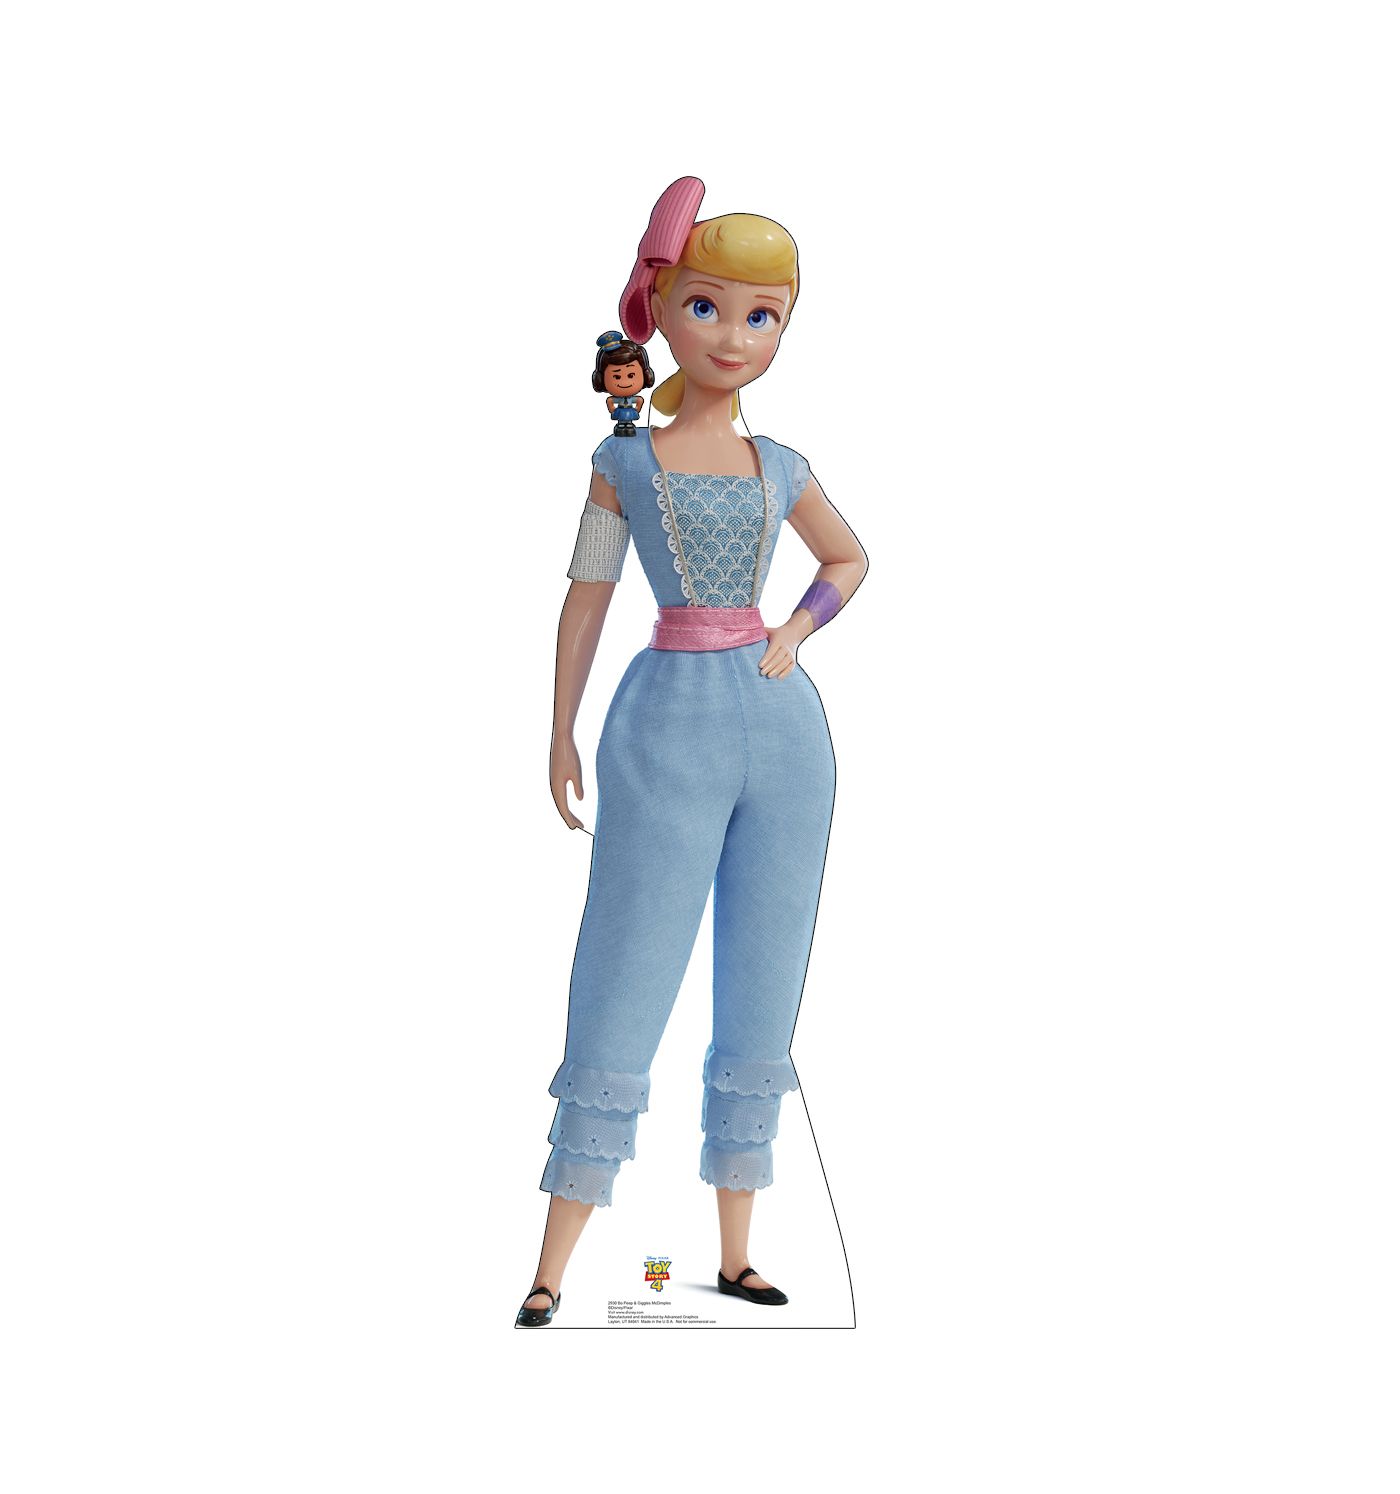 Toy Story 4 Movie – Duke Caboom, Officer Giggle McDimples, and Gabby Gabby